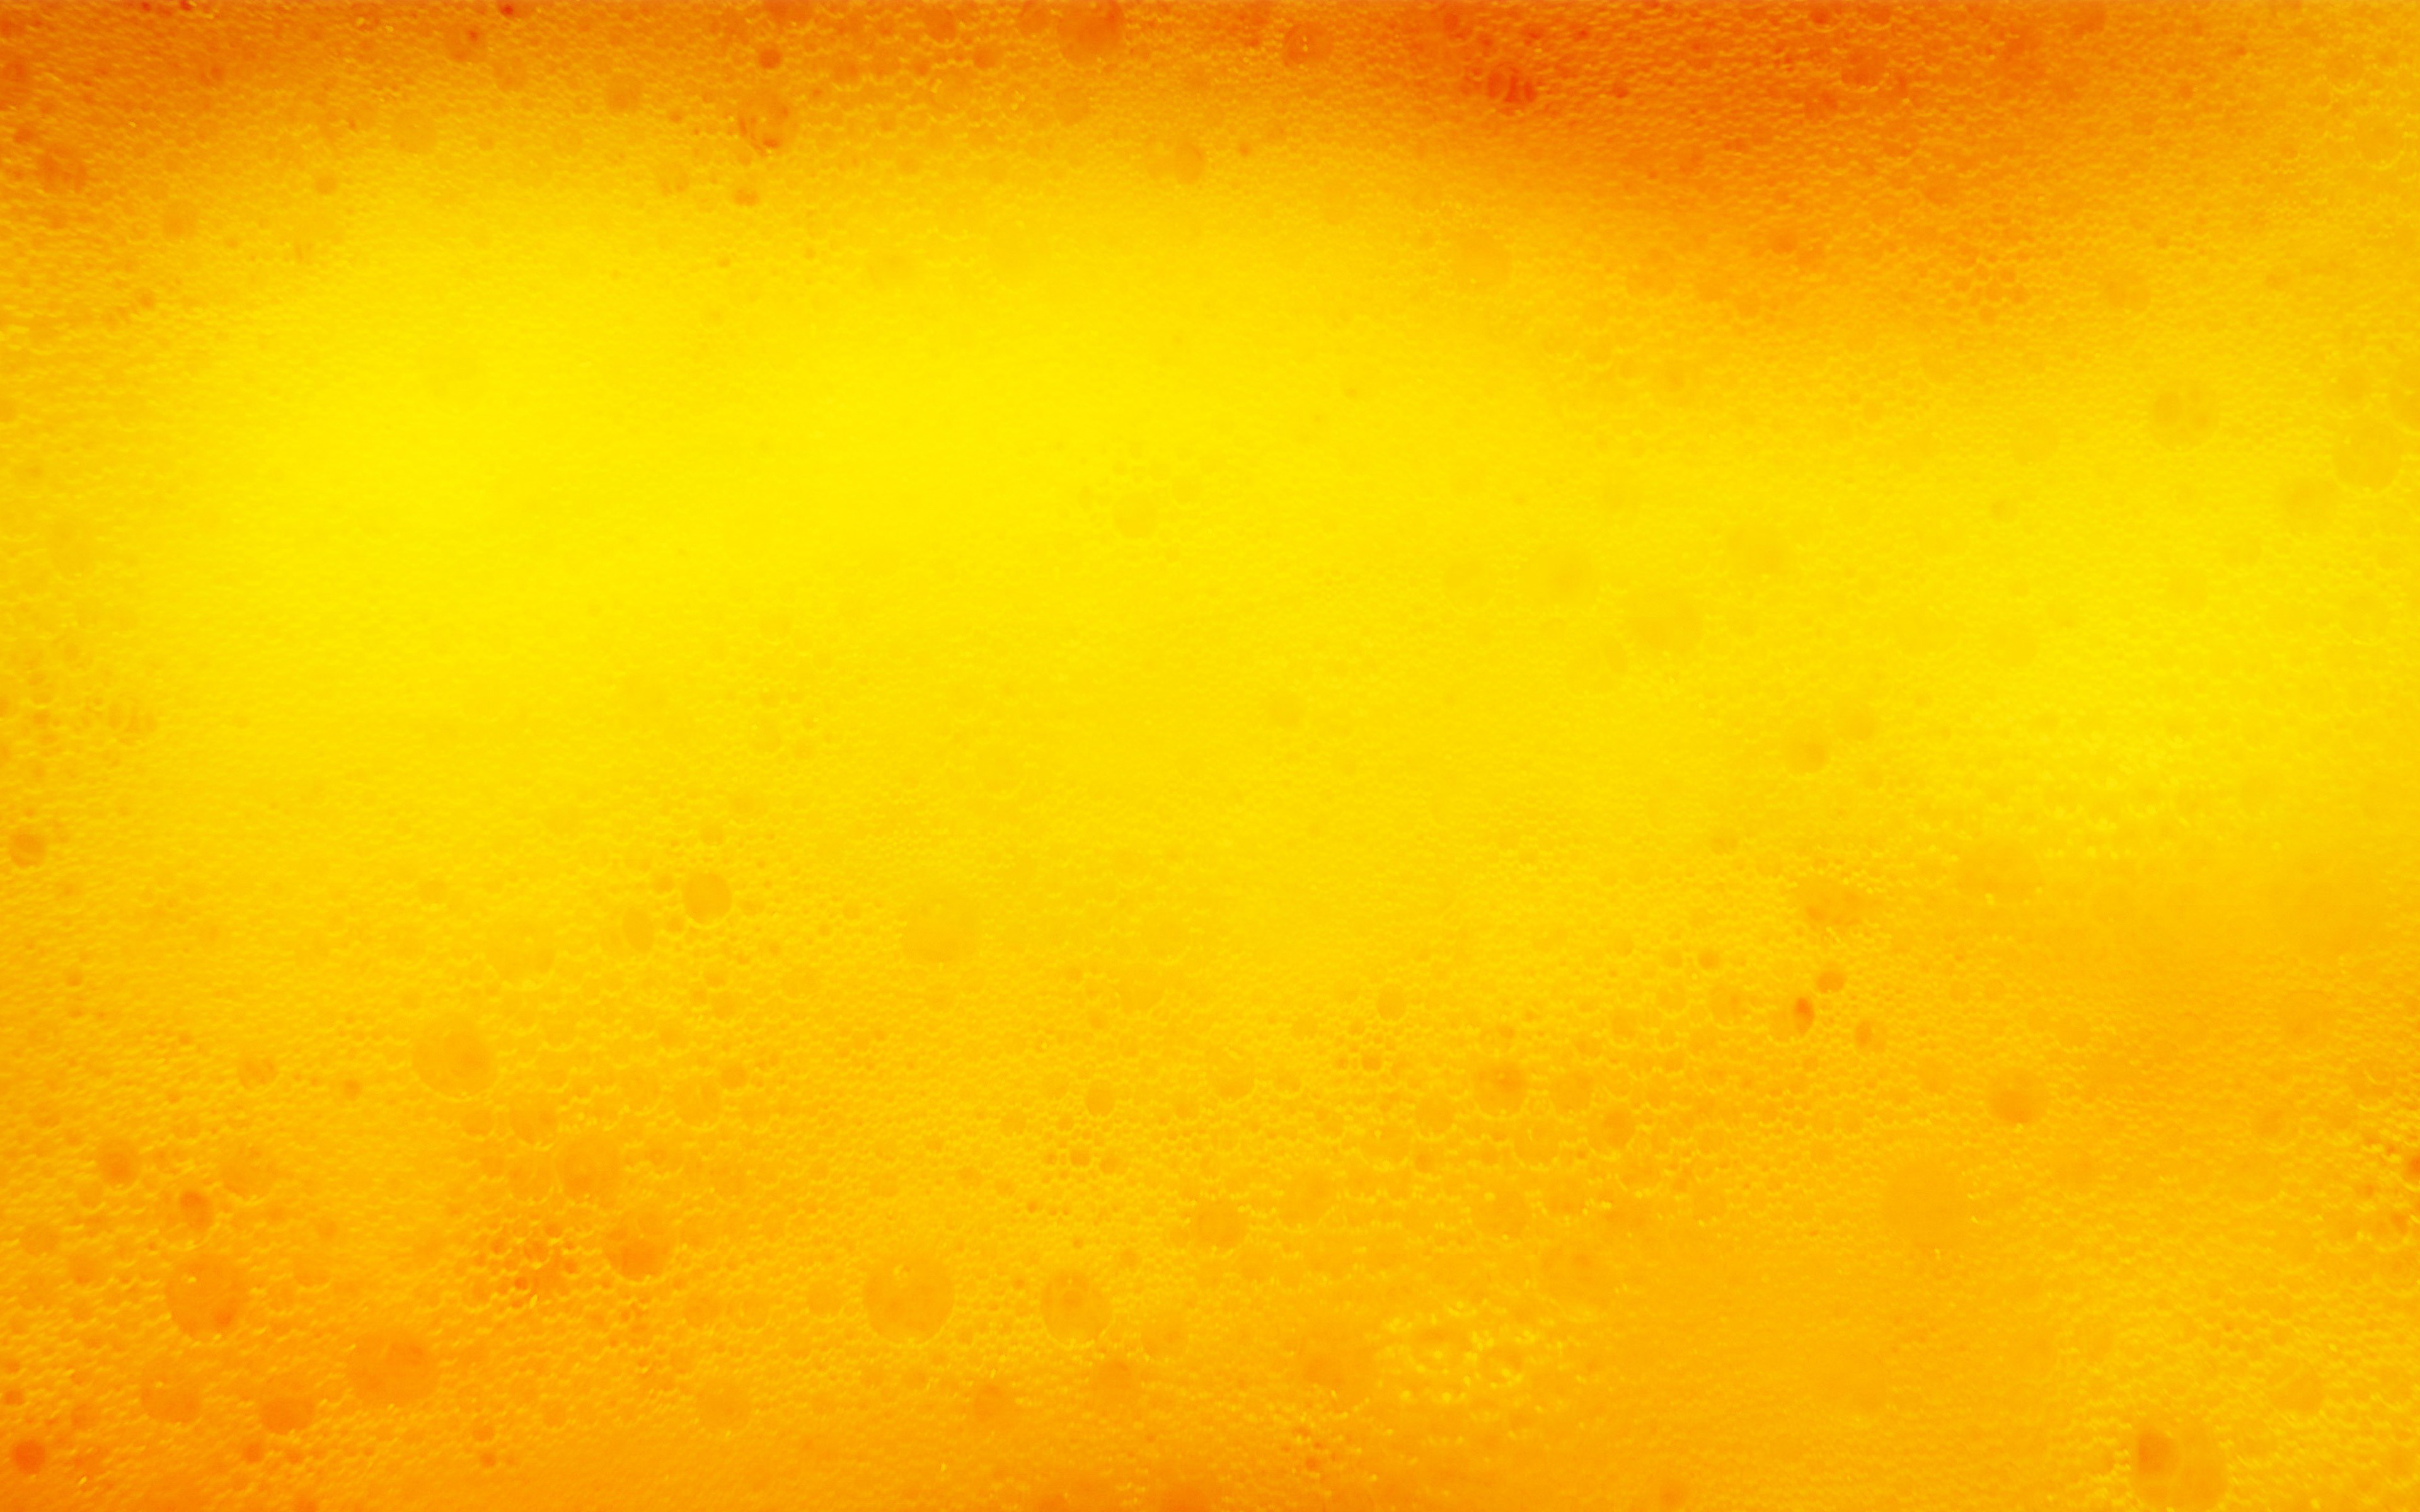 Download wallpapers beer texture, 4k, drinks texture, macro, yellow  backgrounds, beer backgrounds, beer, light beer for desktop with resolution  3840x2400. High Quality HD pictures wallpapers